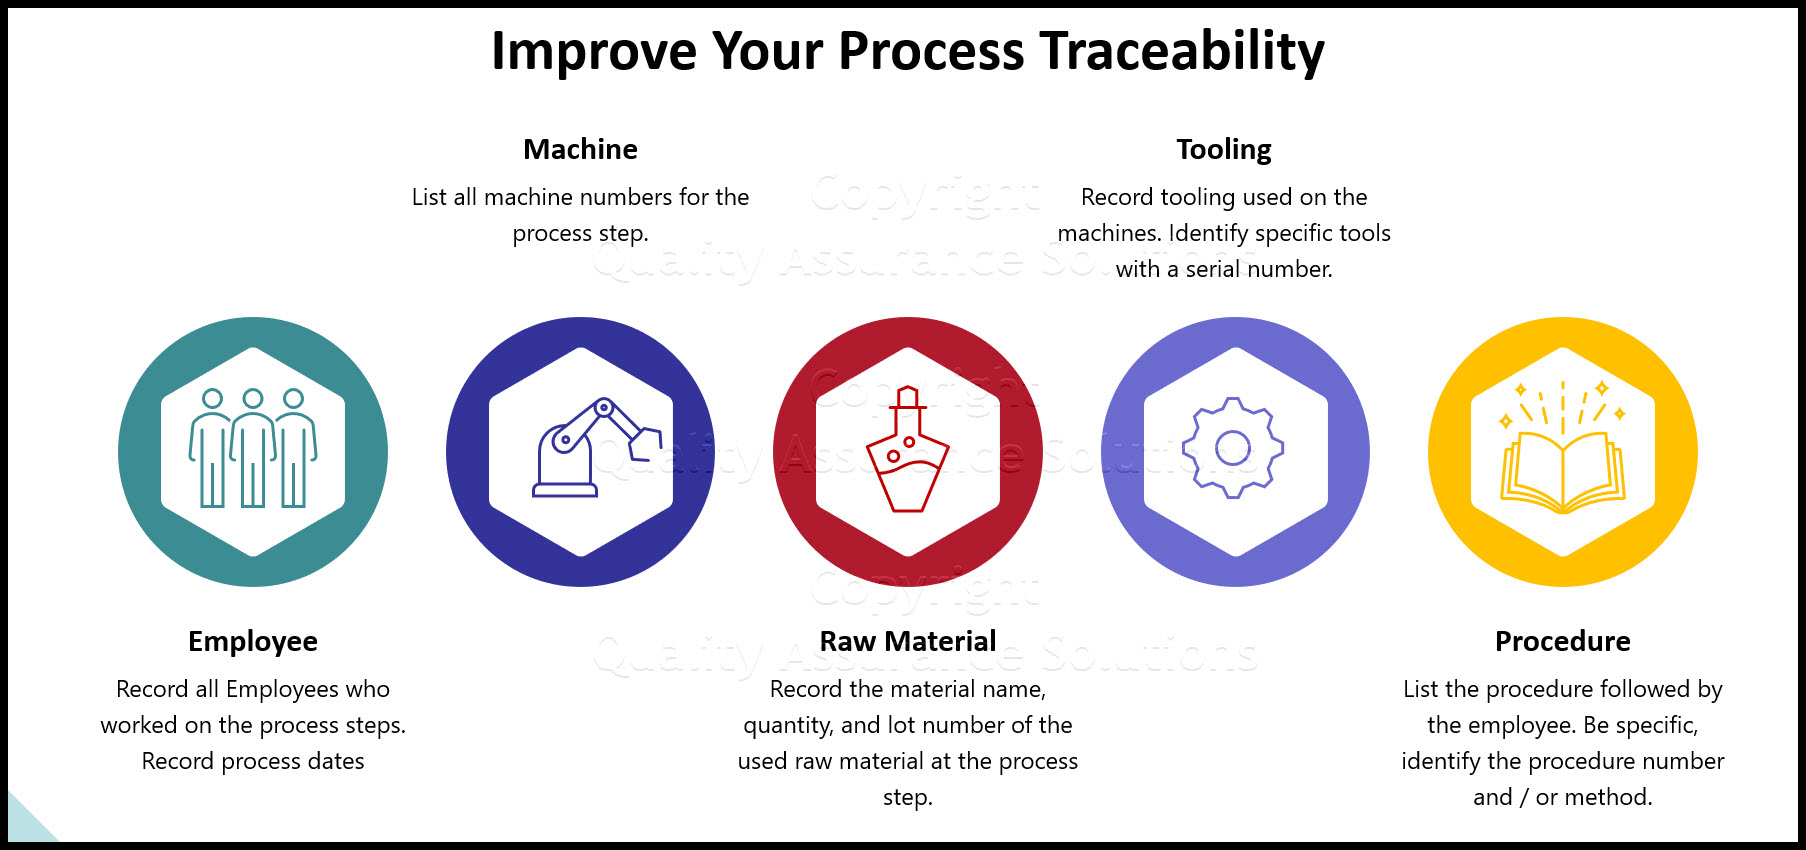 Describes the important items to cover in your Product Information Traceability System. Traceability is critical to ISO 9001 certification.